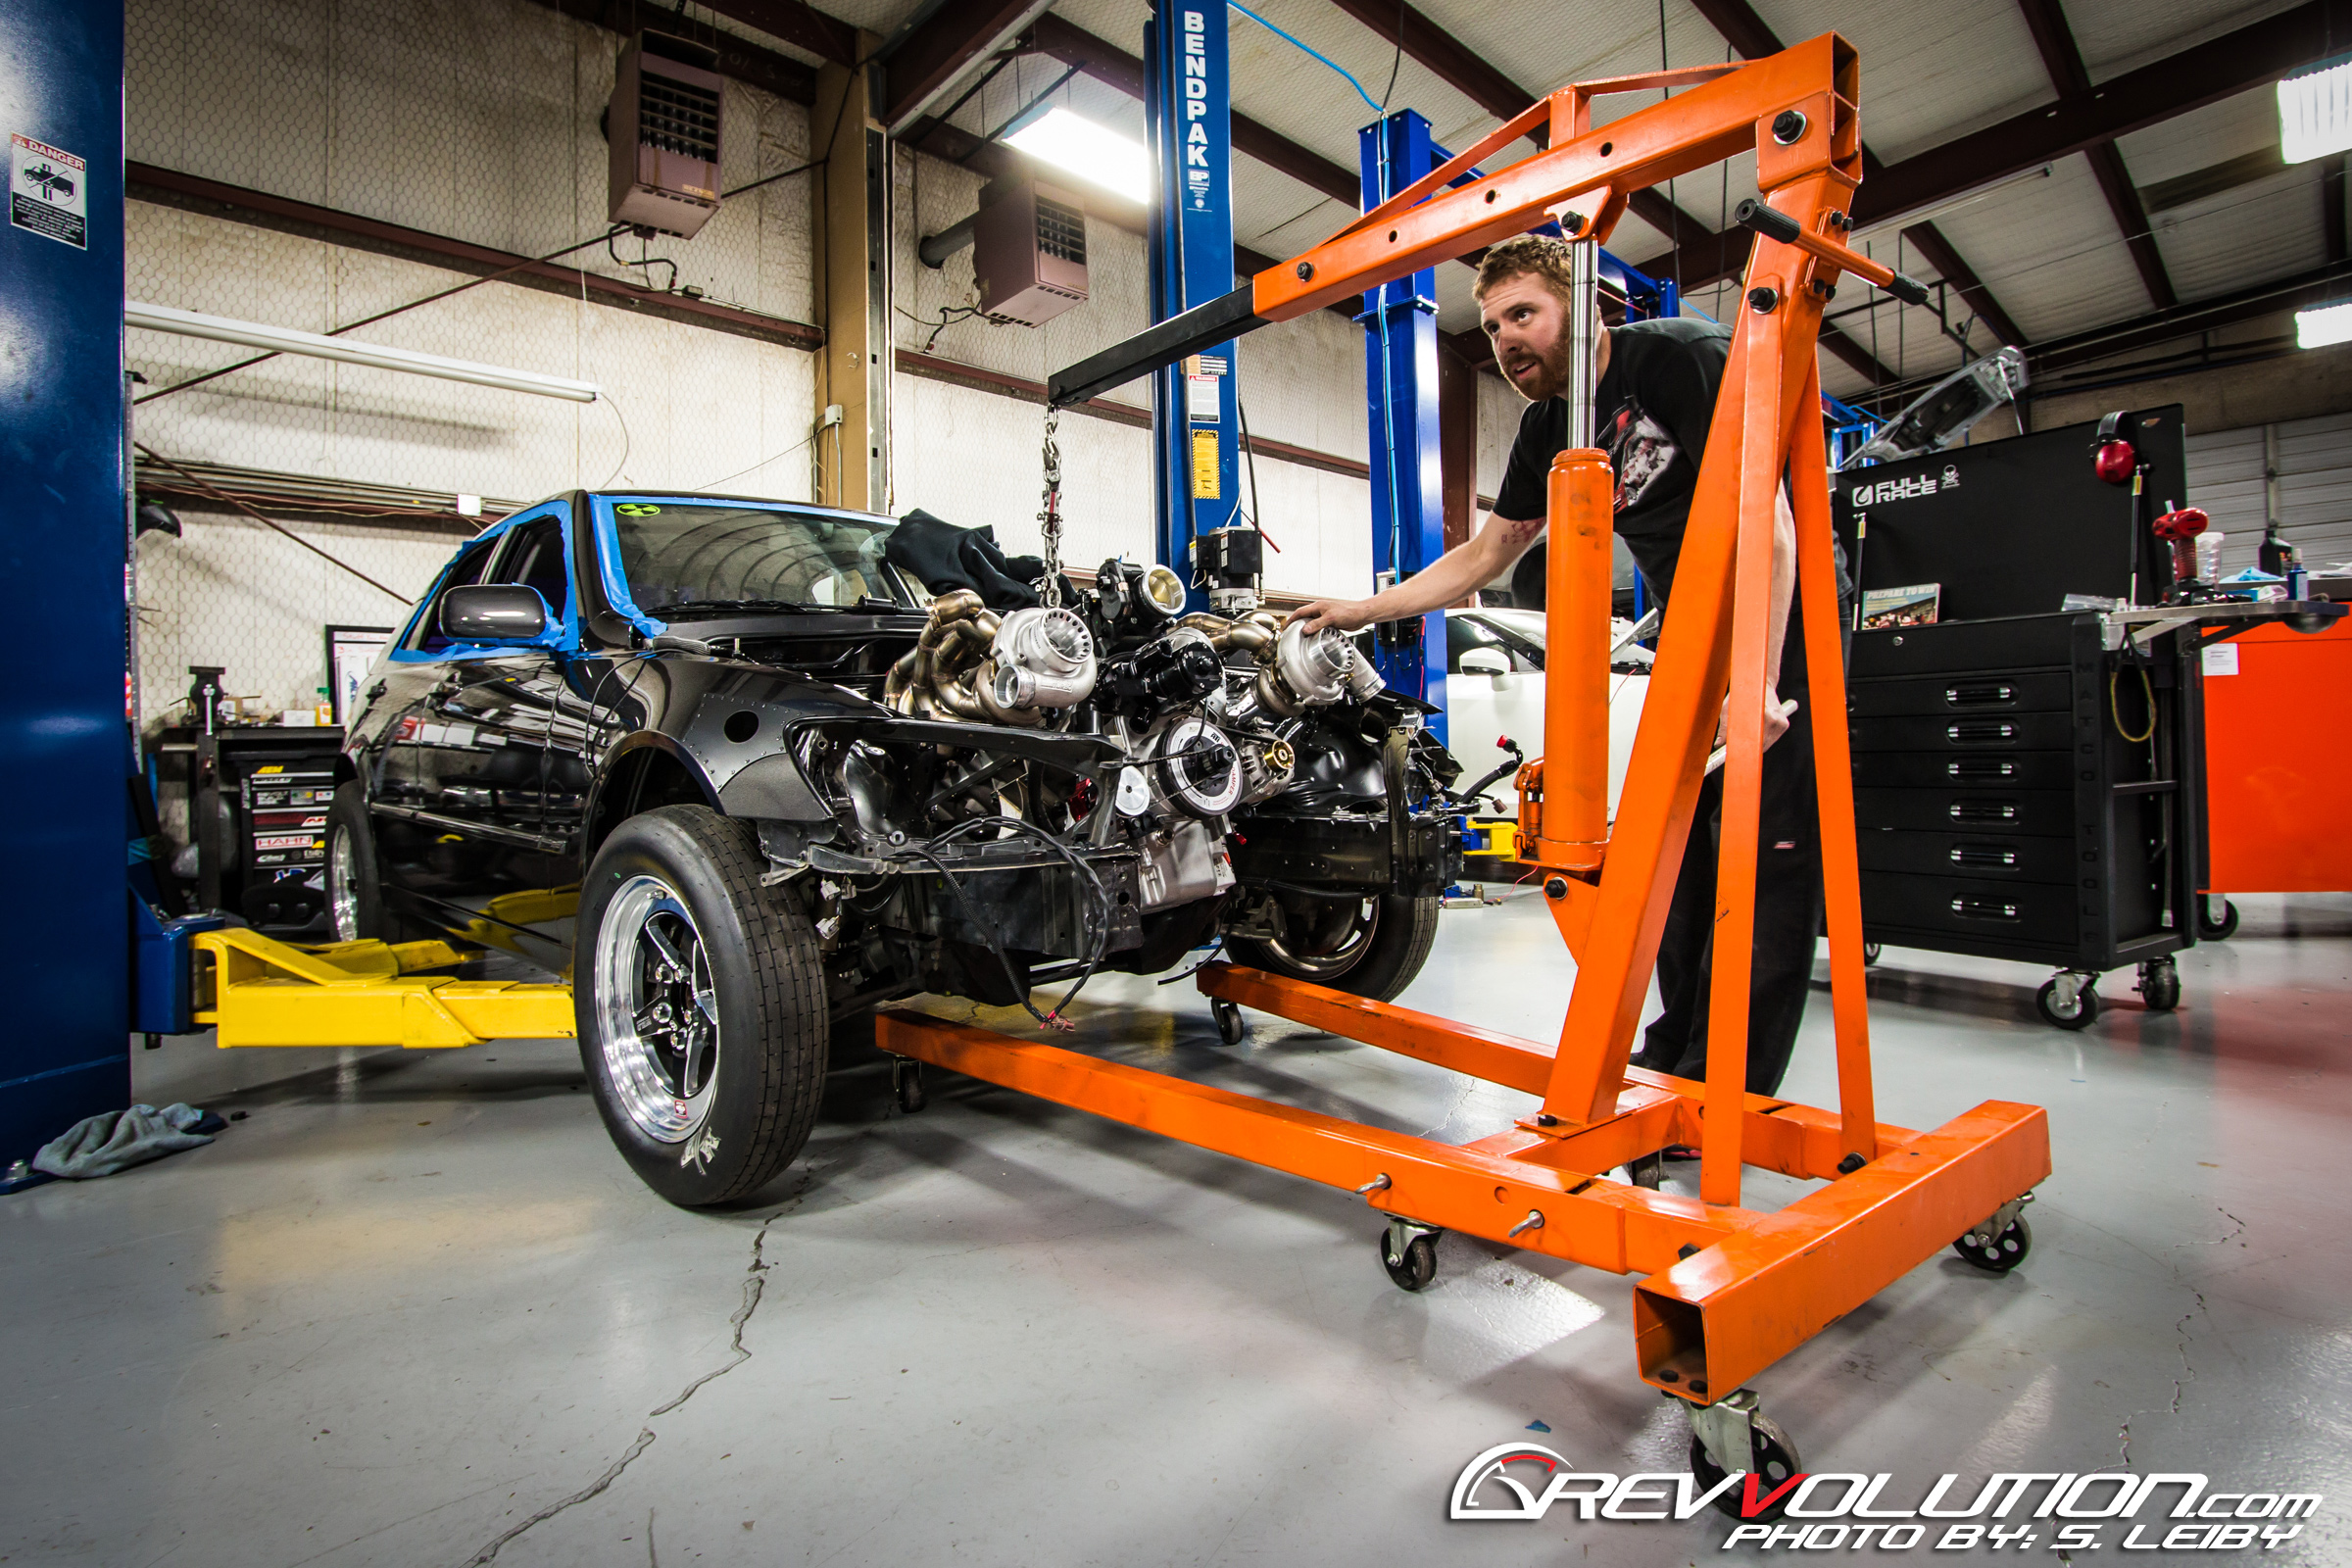 Rippin: The Twin Turbo LS-swapped IS300